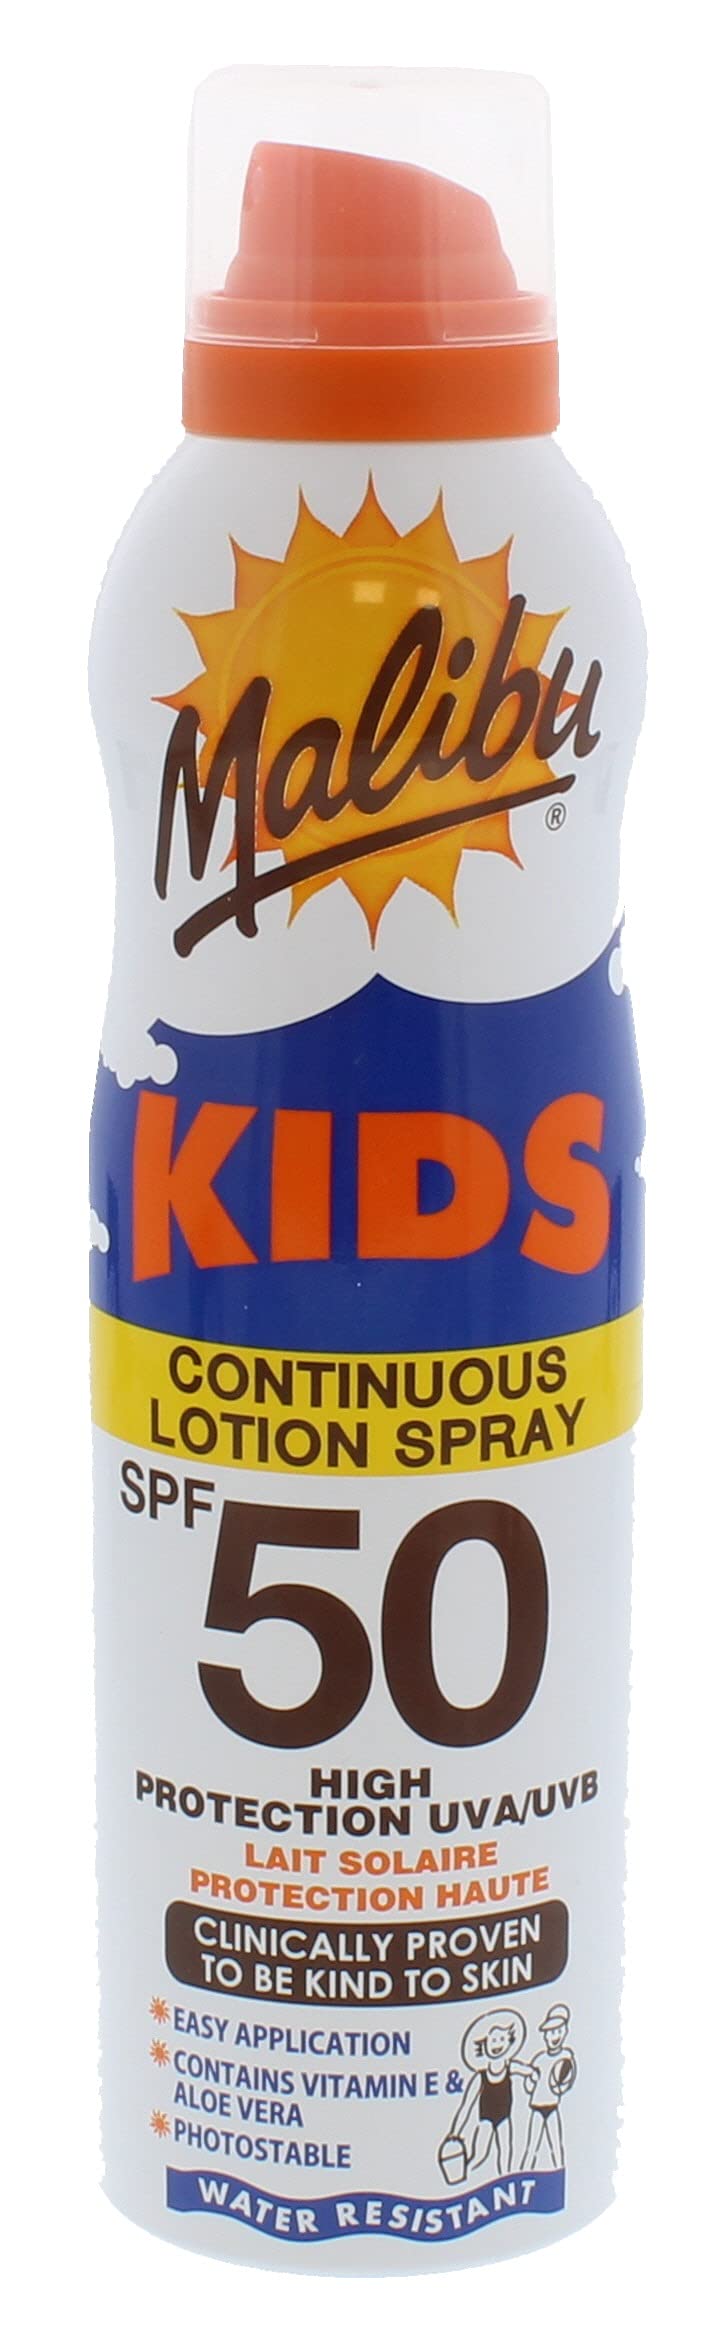 Malibu Kids High Protection Water Resistant SPF 50 Sun-Screen Continuous Lotion Spray, 175ml